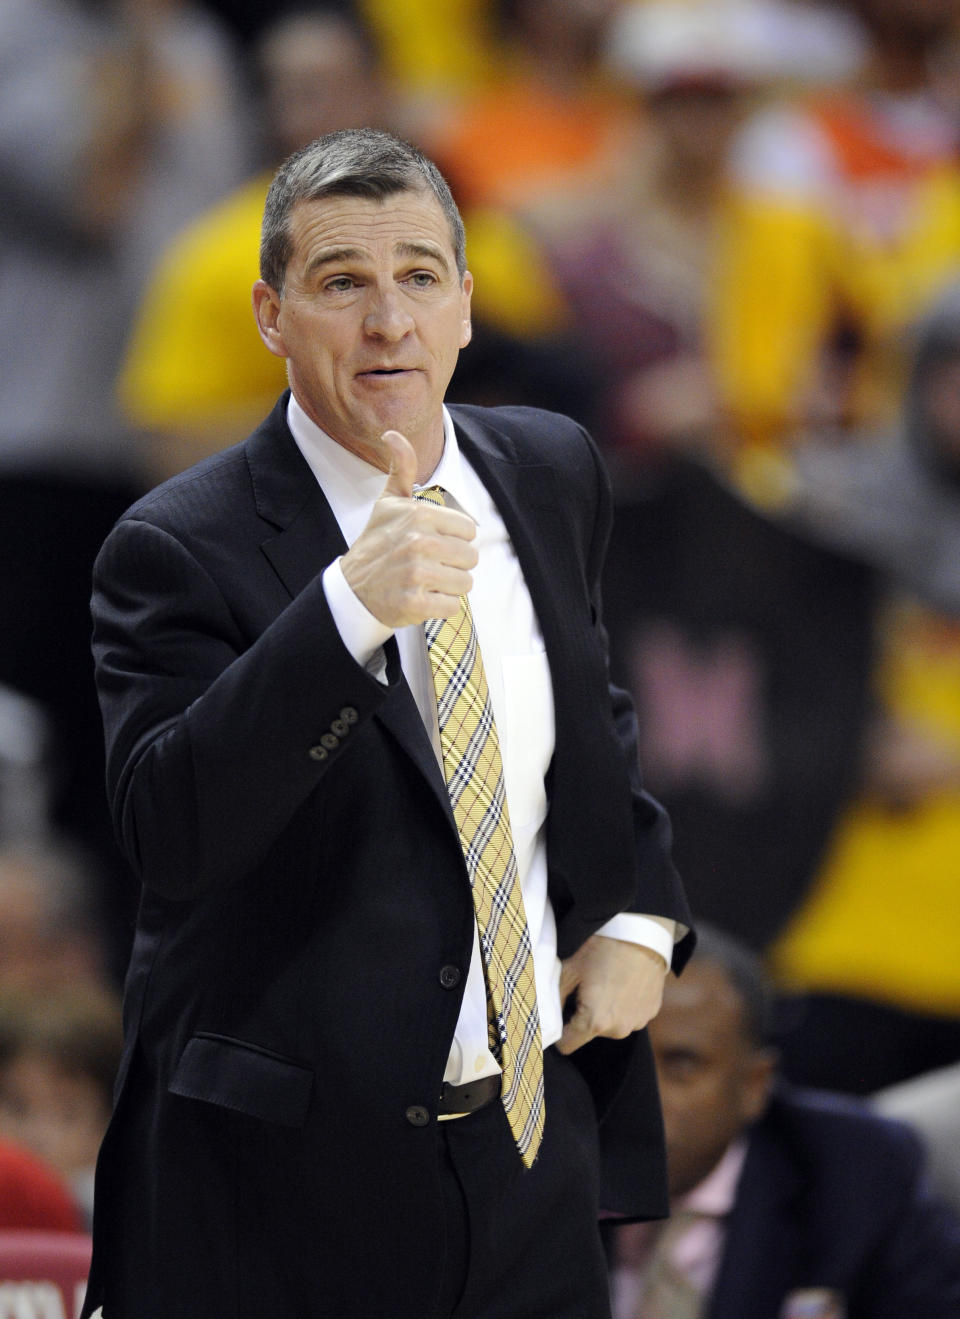 Maryland head coach Mark Turgeon gestures during the first half of an NCAA college basketball game against Syracuse, Monday, Feb. 24, 2014, in College Park, Md. Syracuse won 57-55. (AP Photo/Nick Wass)